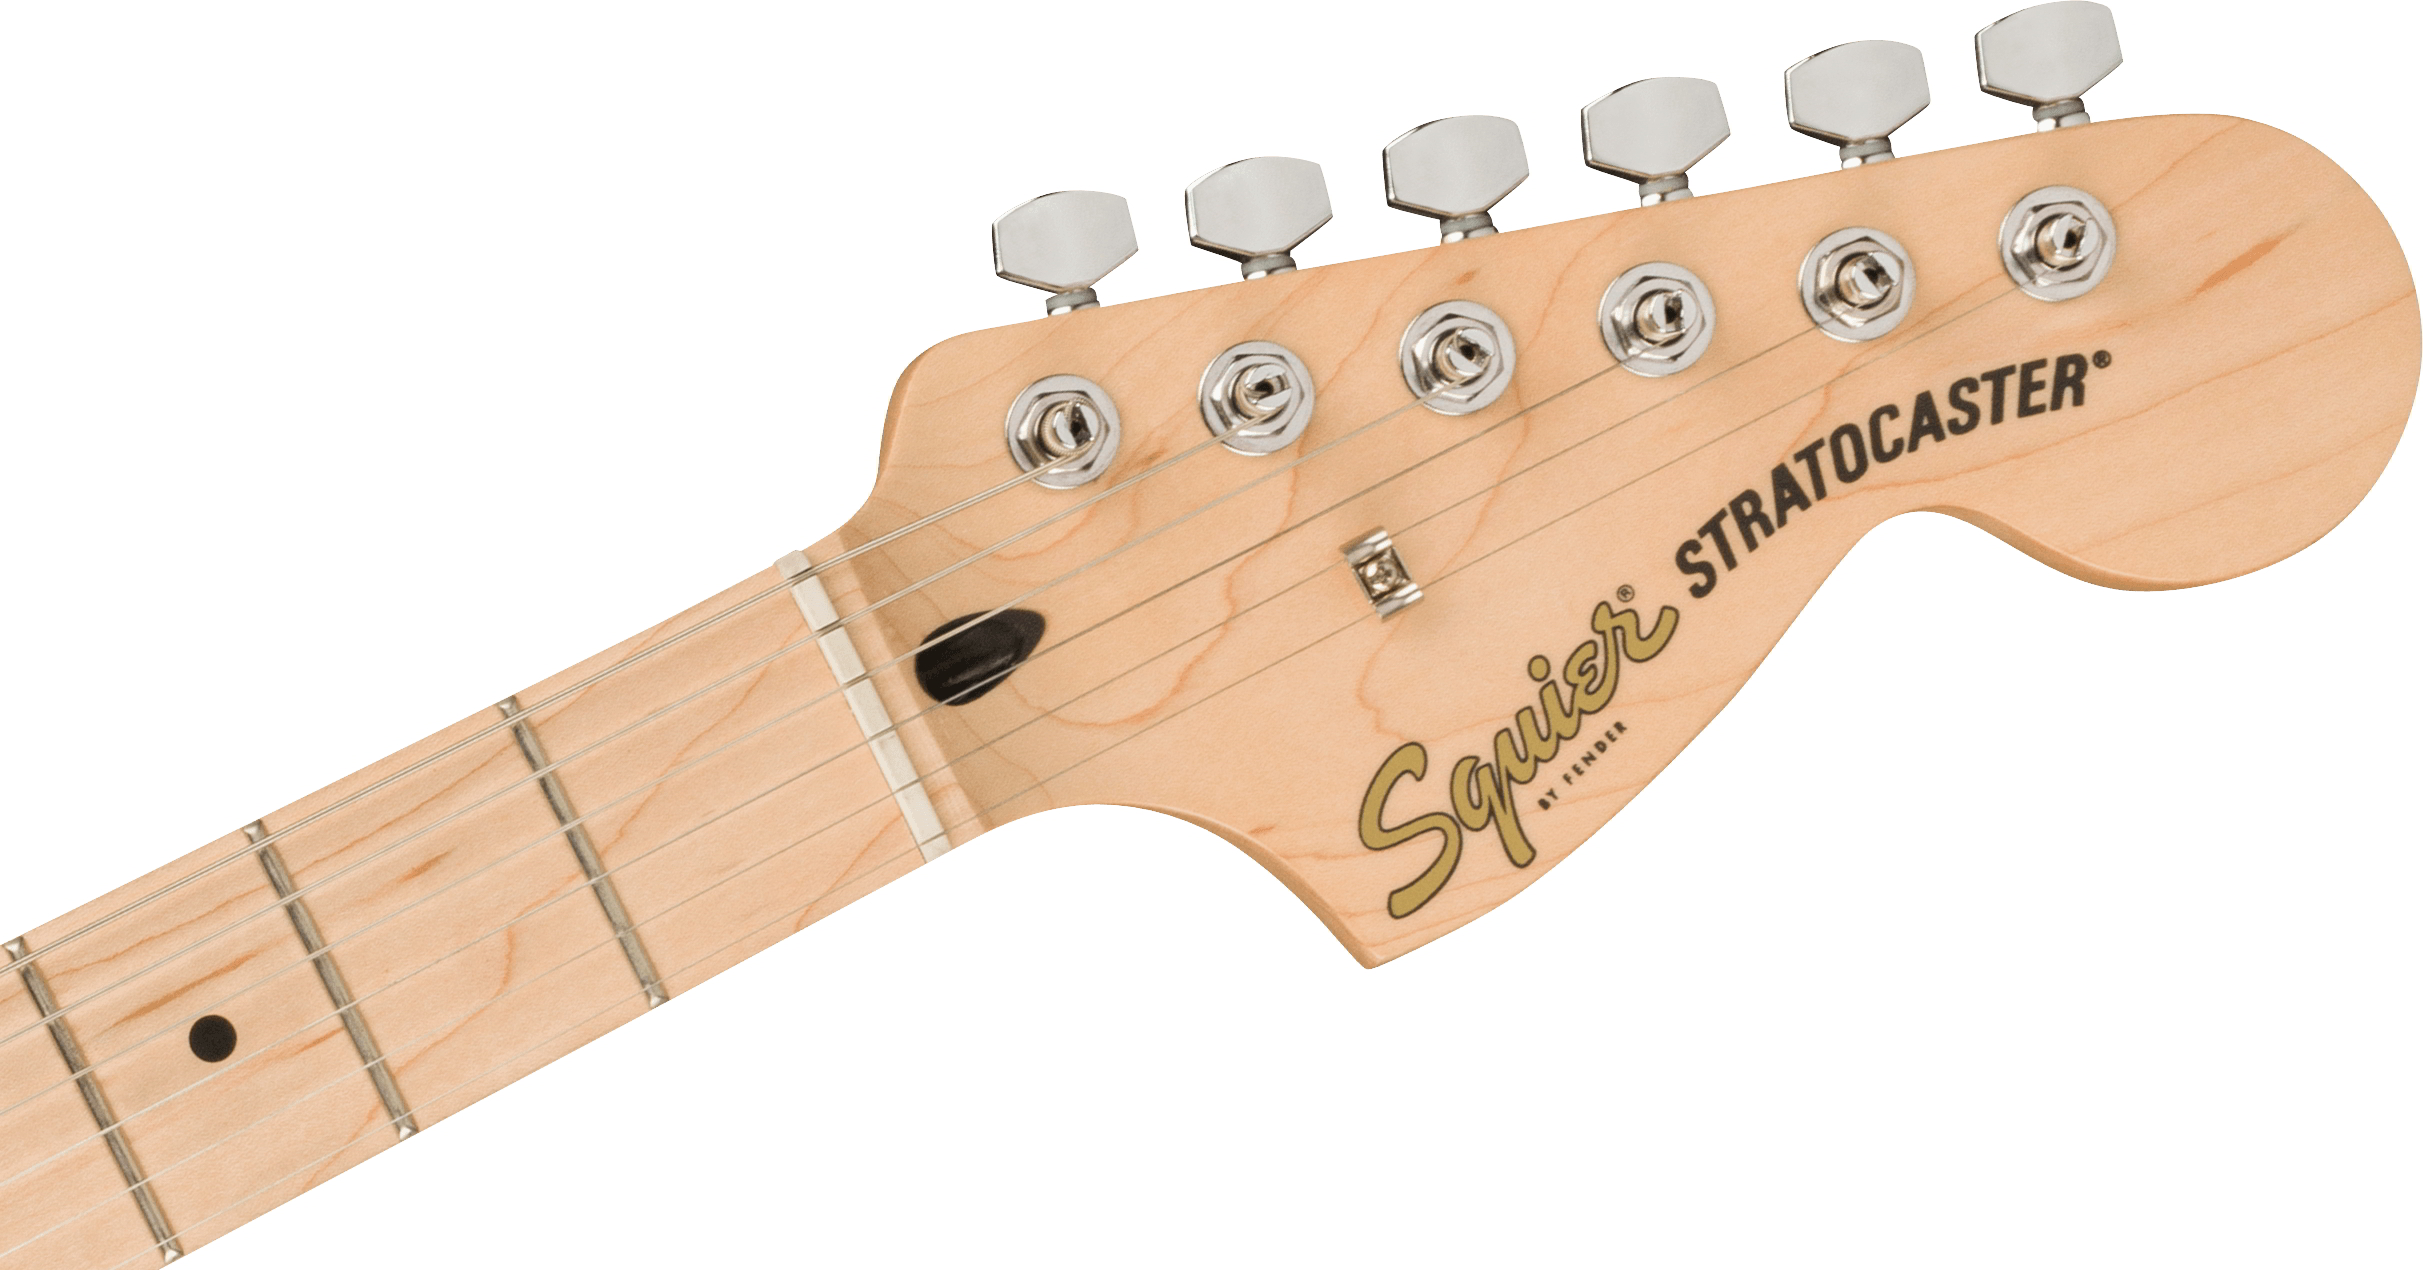 Affinity Series Stratocaster, Maple Fingerboard, White Pickguard, Olympic White追加画像